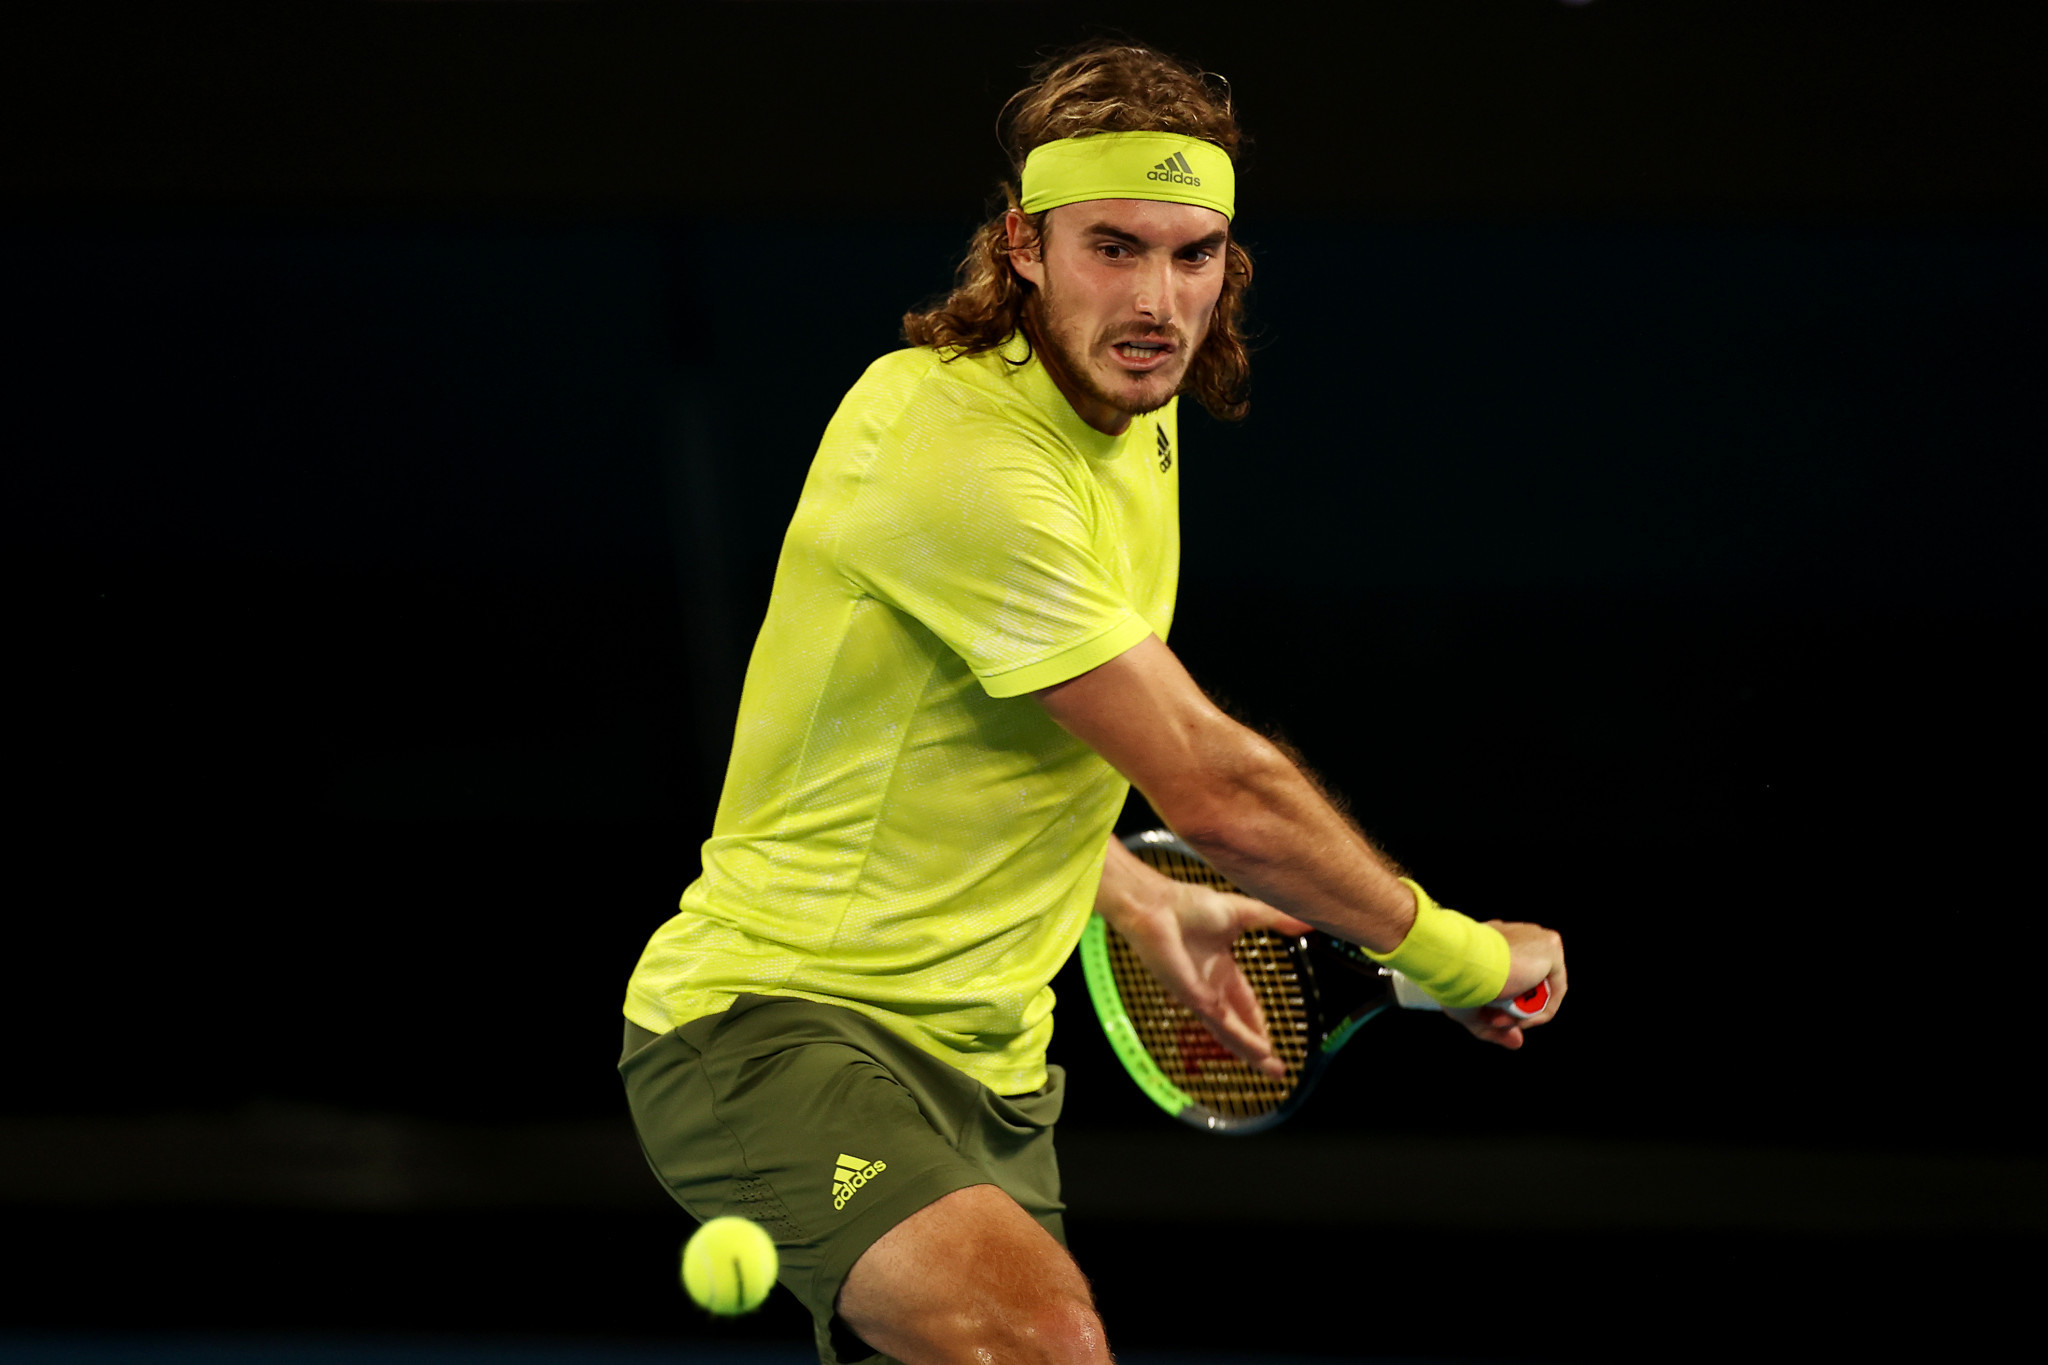 Stefanos Tsitsipas shone during a straight sets win over France's Gilles Simon, with the Greek star dropping just five games in the process ©Getty Images